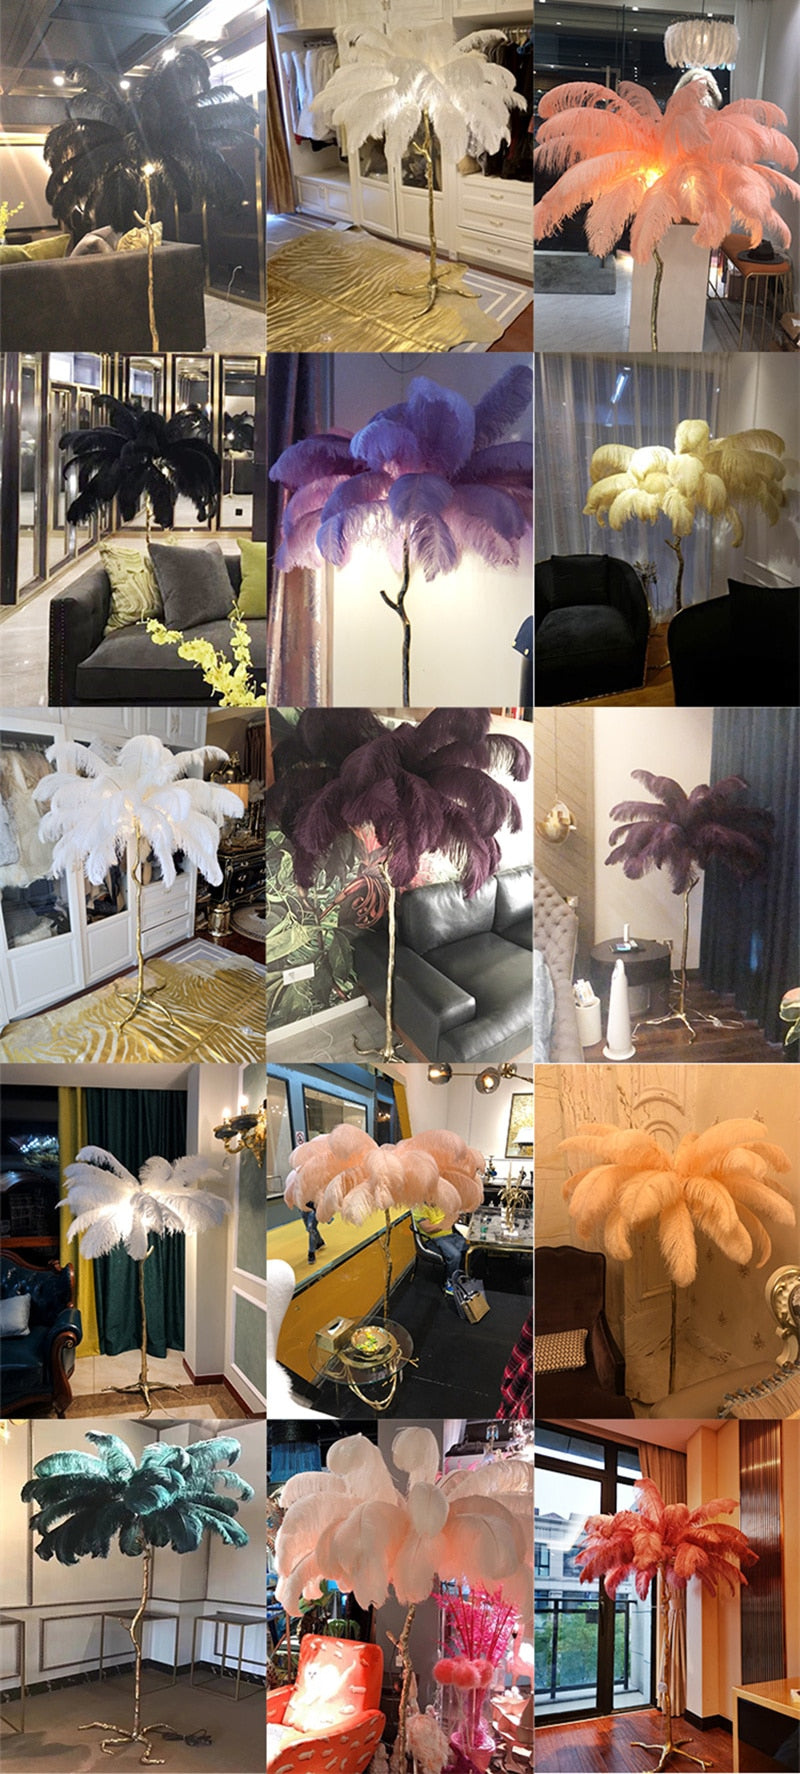 Luxury Tree Branch Feather Lamp - Neshaí Fashion & More